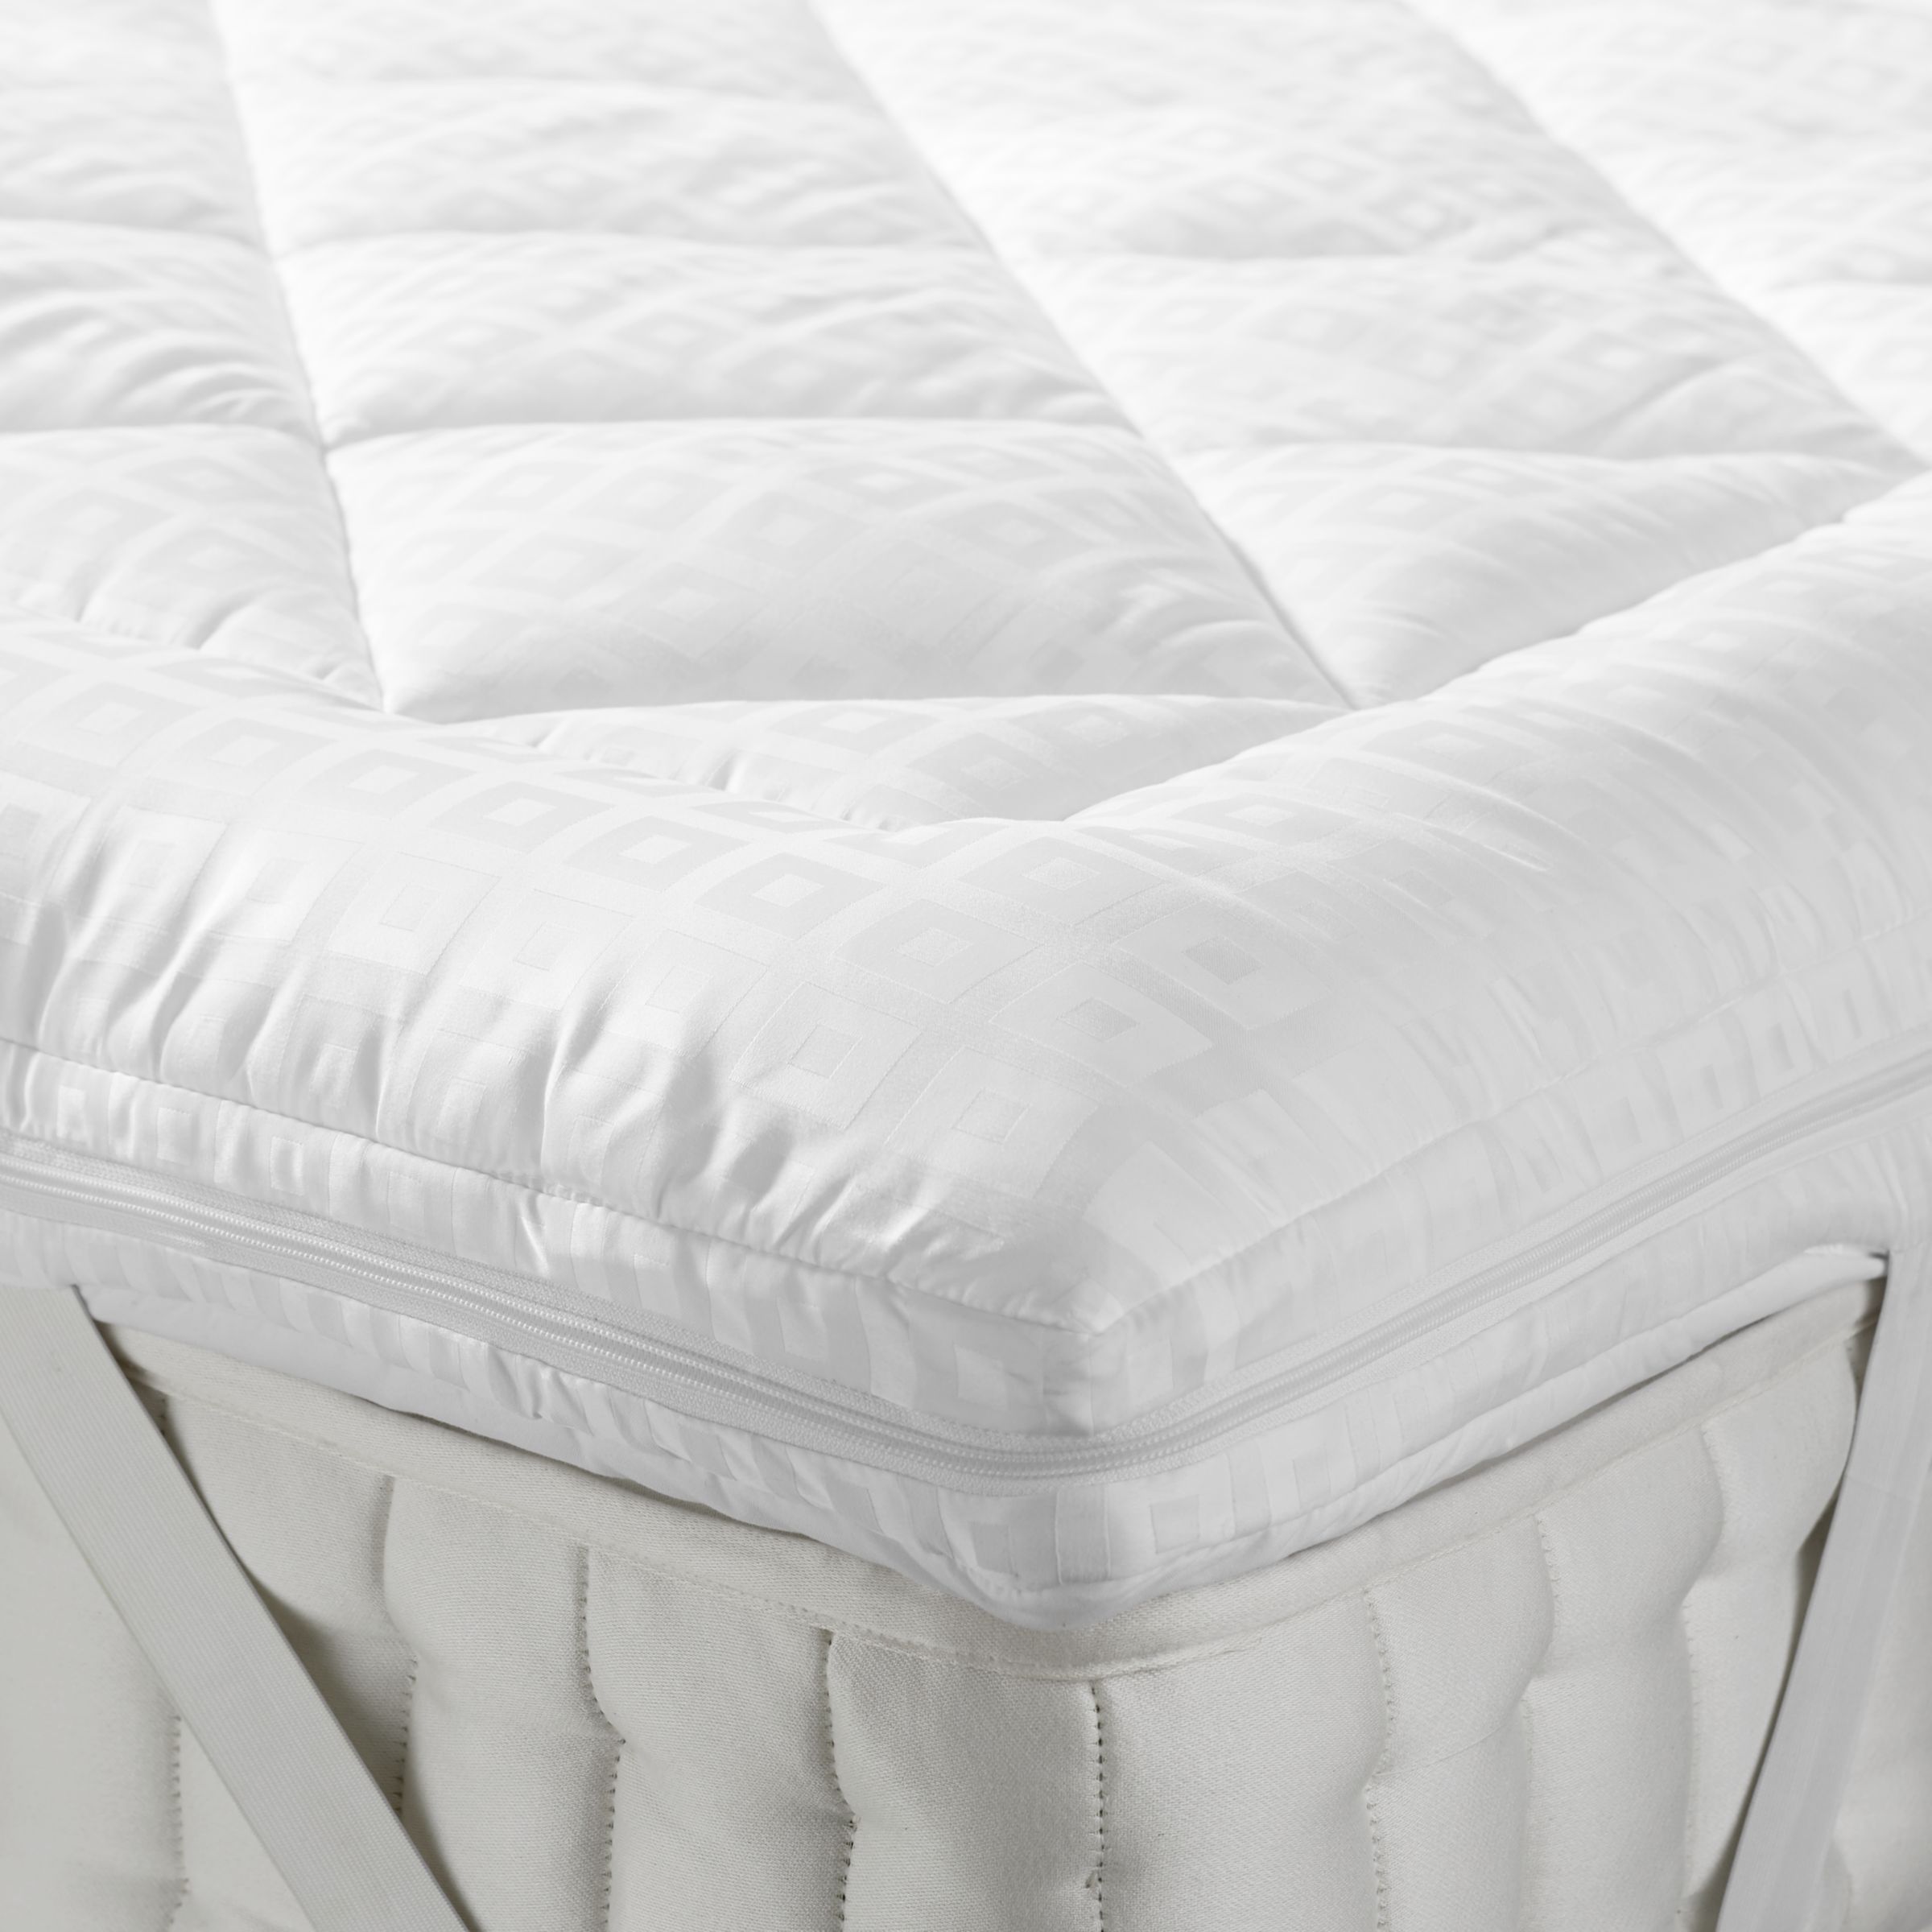 King Size Mattress Toppers John Lewis, King Size Bed Topper